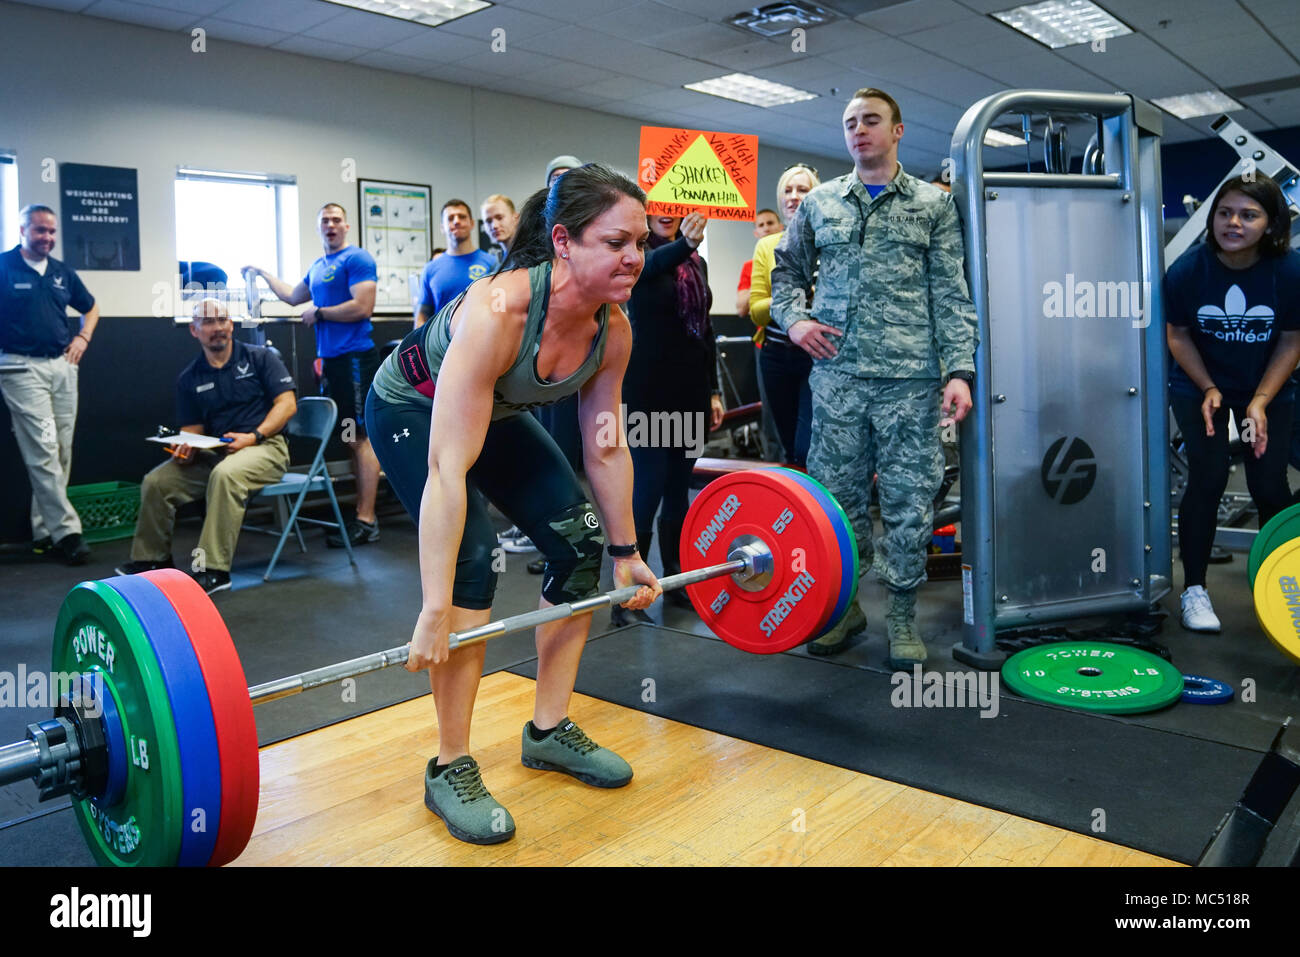 Deadlift Competition High Resolution Stock Photography and Images - Alamy